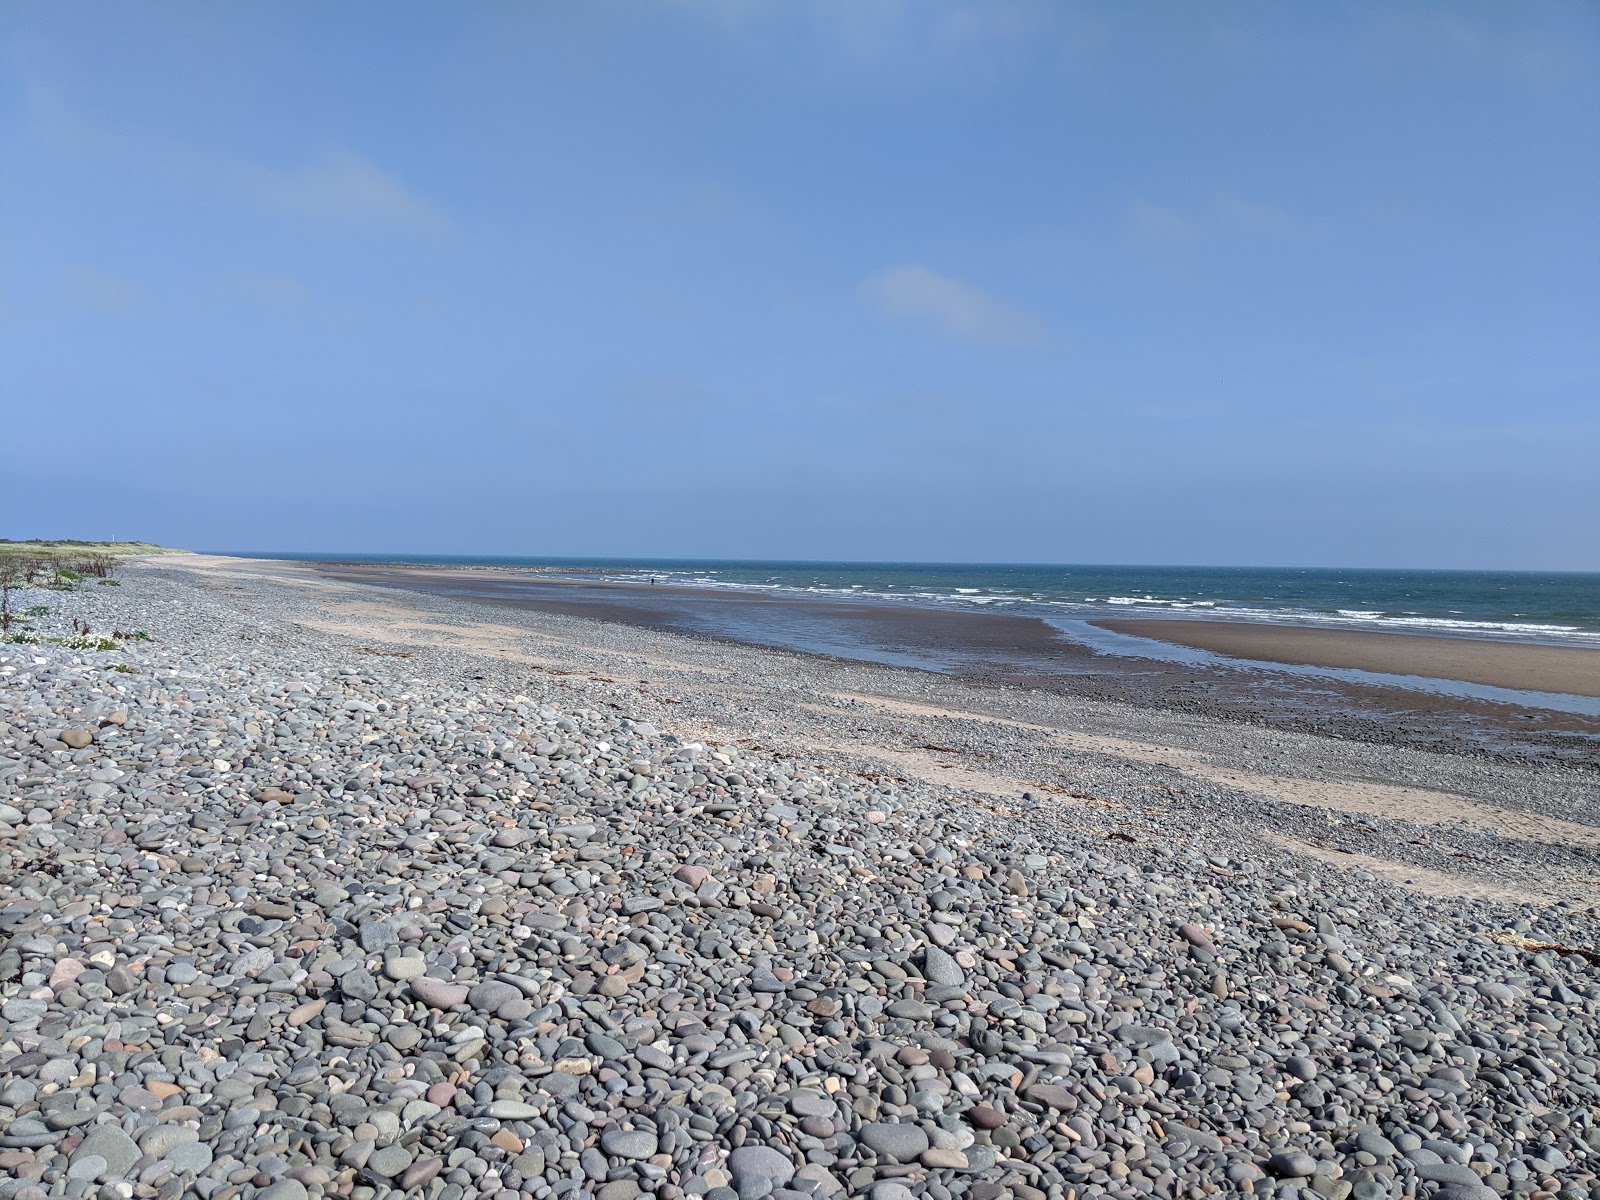 Photo of New England Bay Beach with gray pebble surface